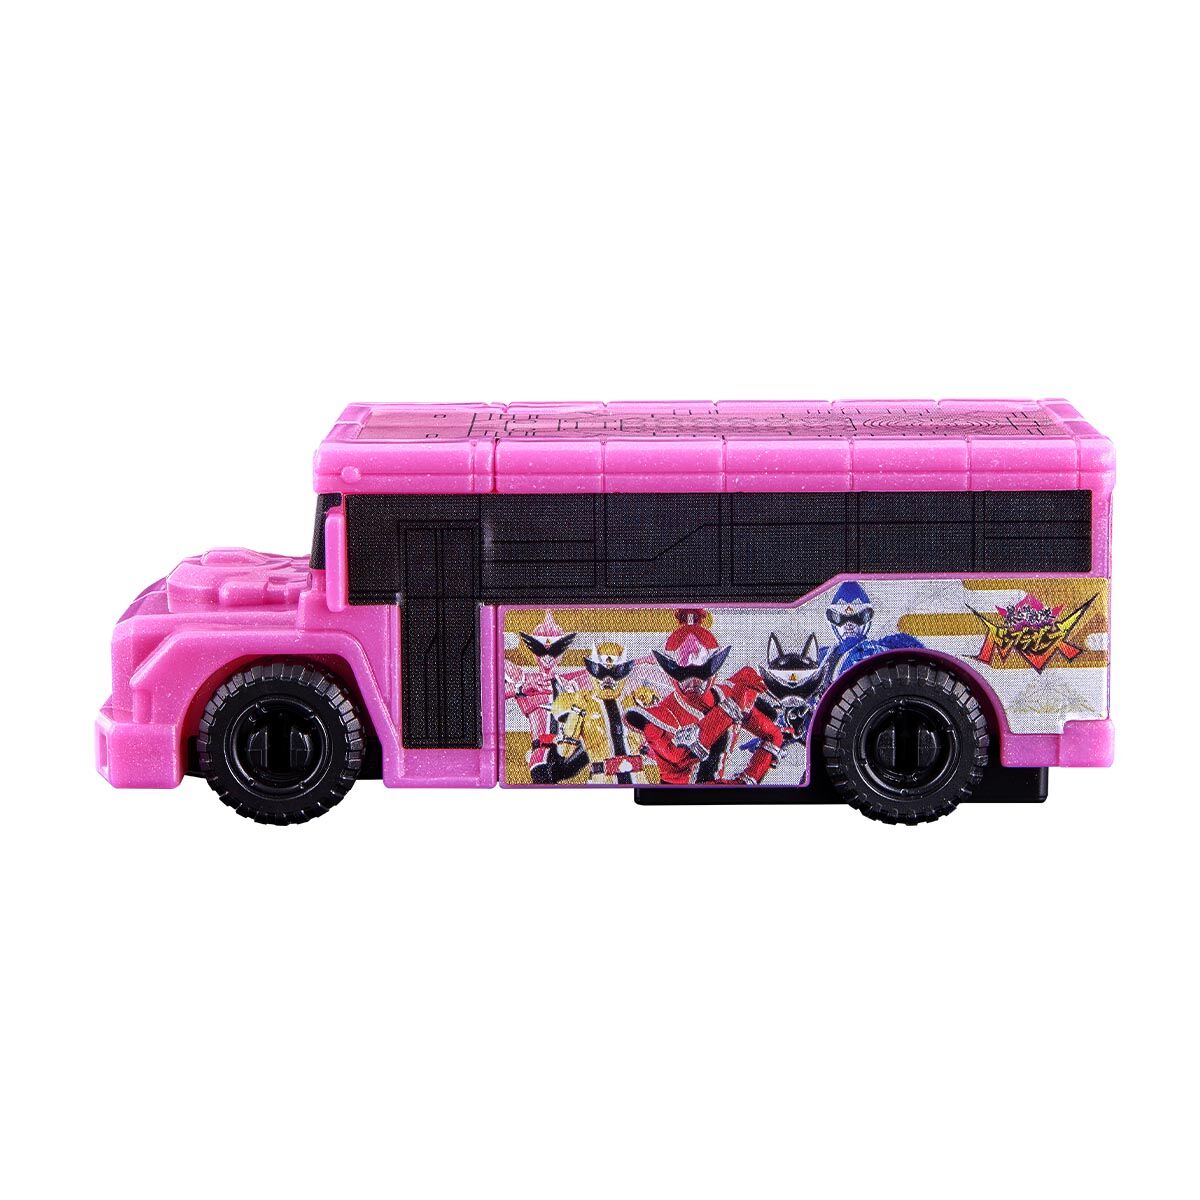 [PREORDER] BoonBoom Tire Plush & BoonBoom Legend Bus (DonBrothers Ver)